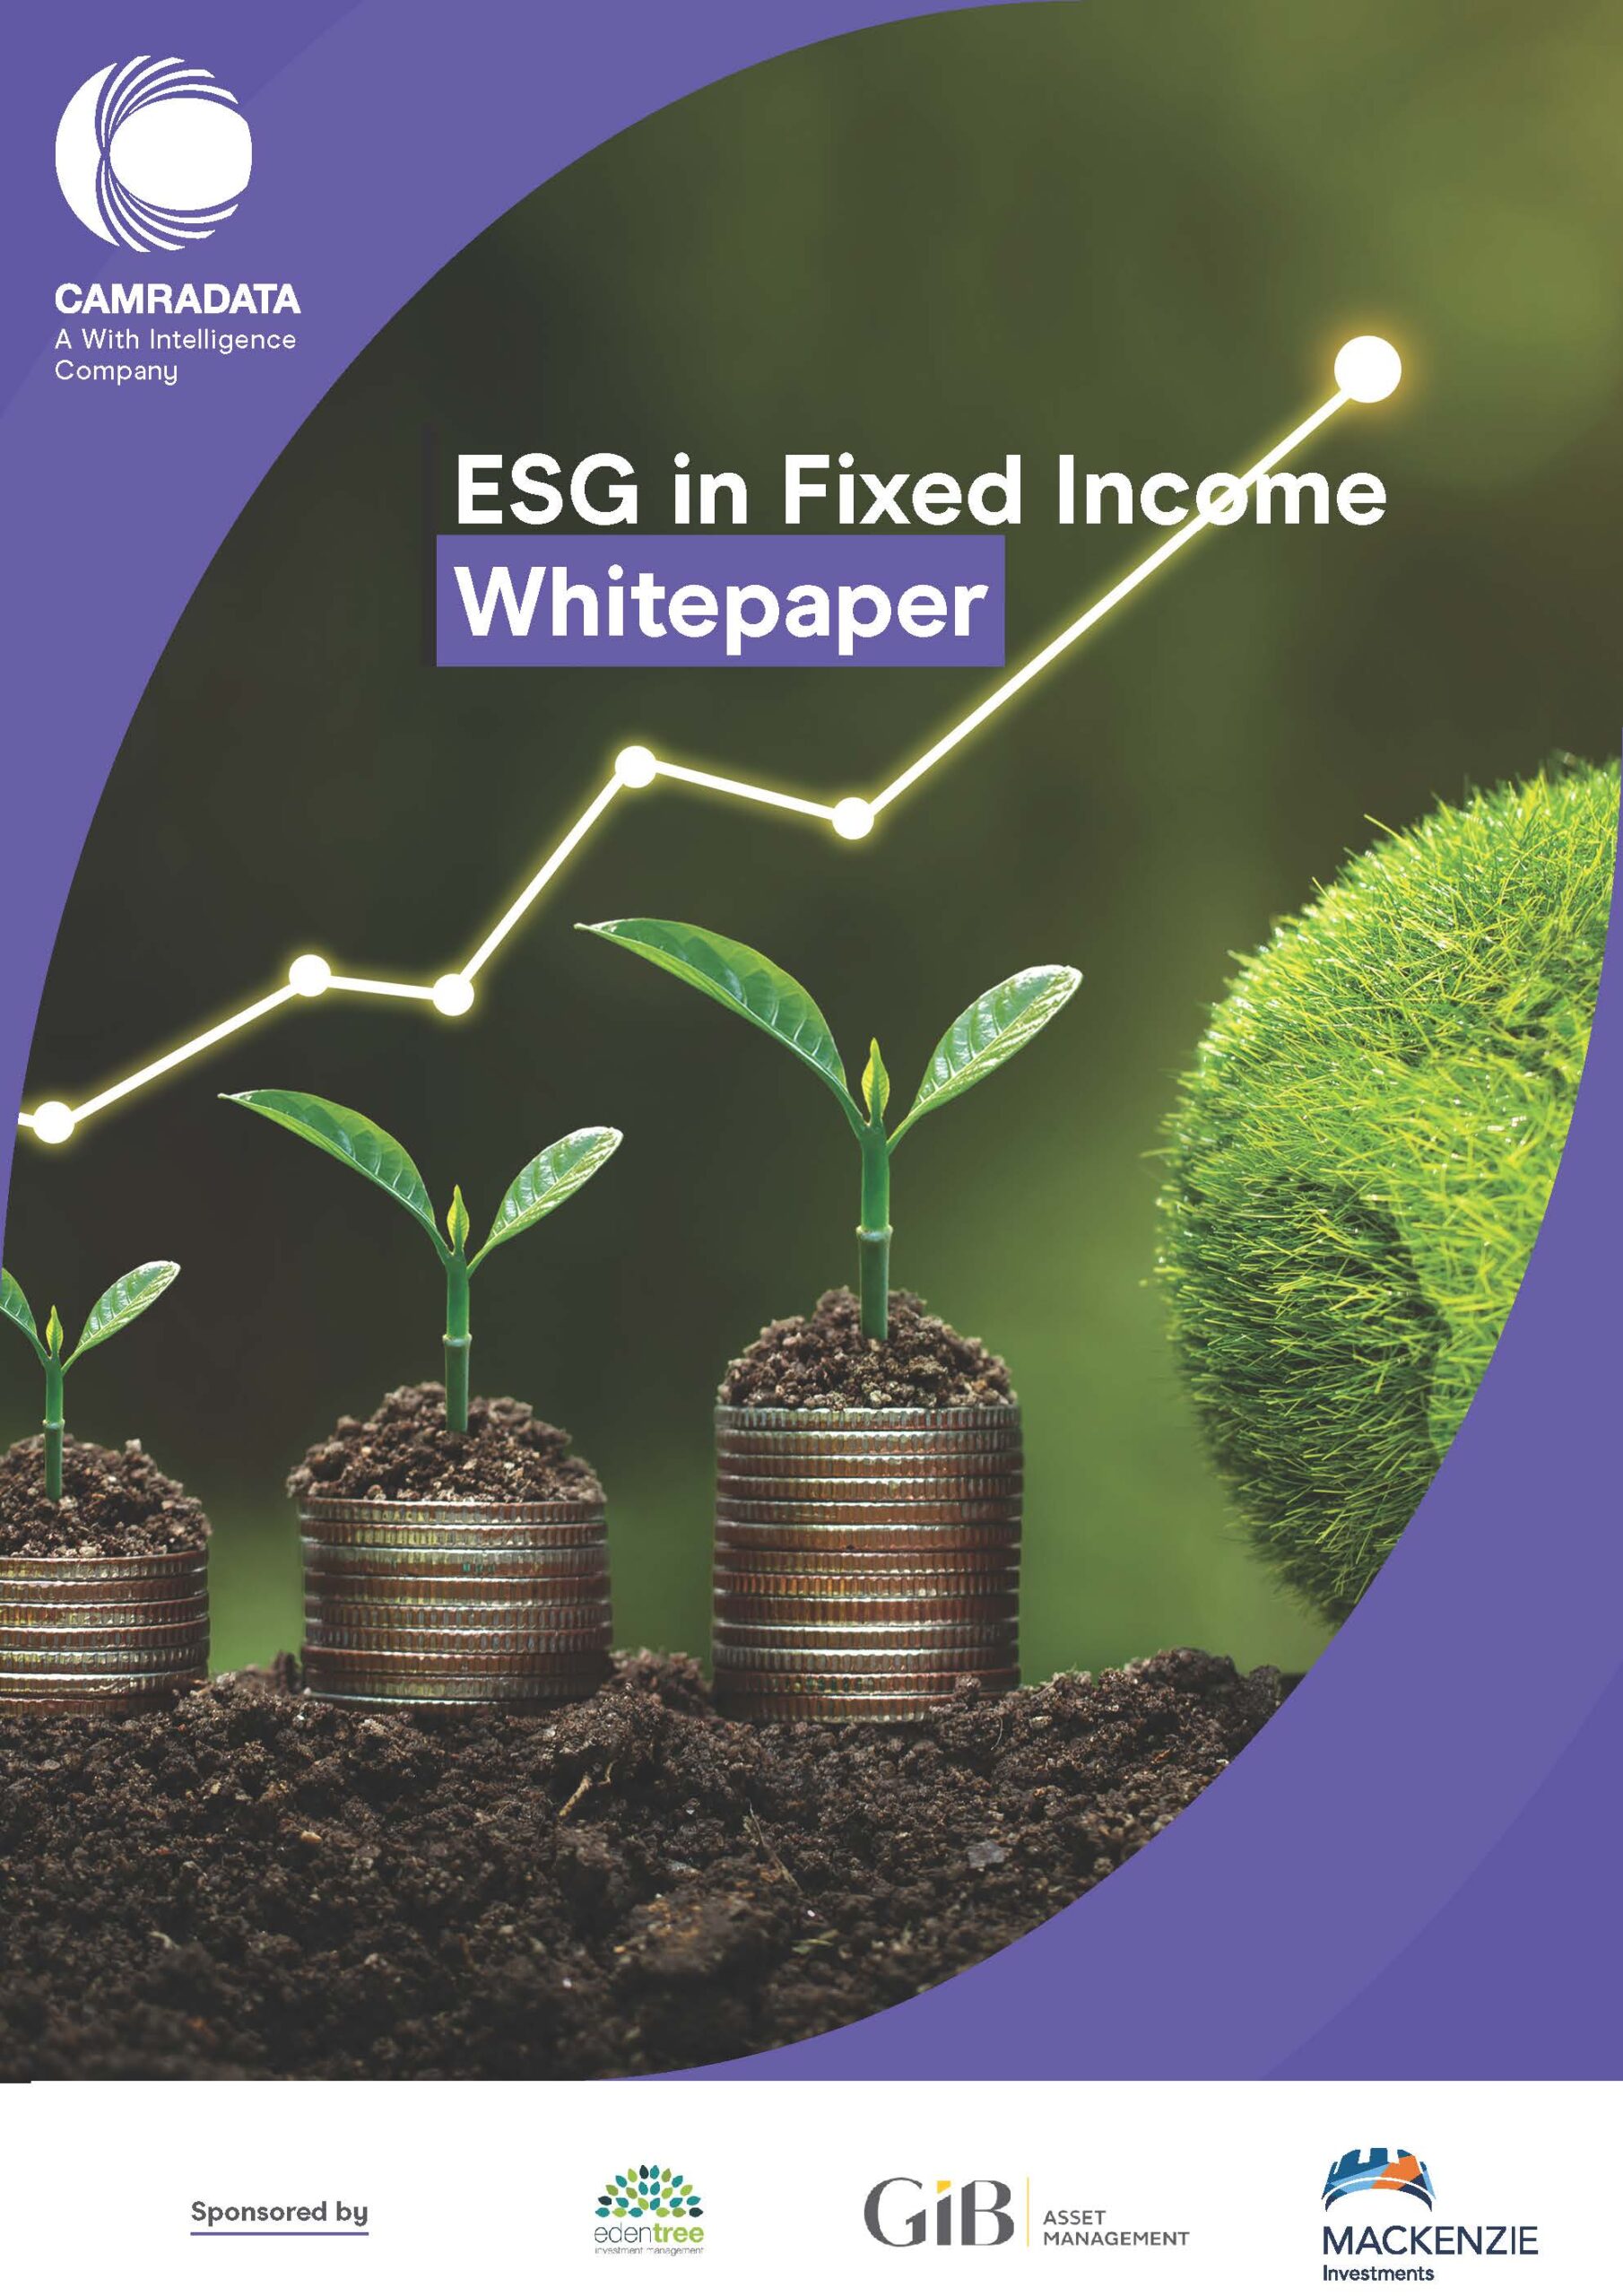 ESG in Fixed Income Whitepaper